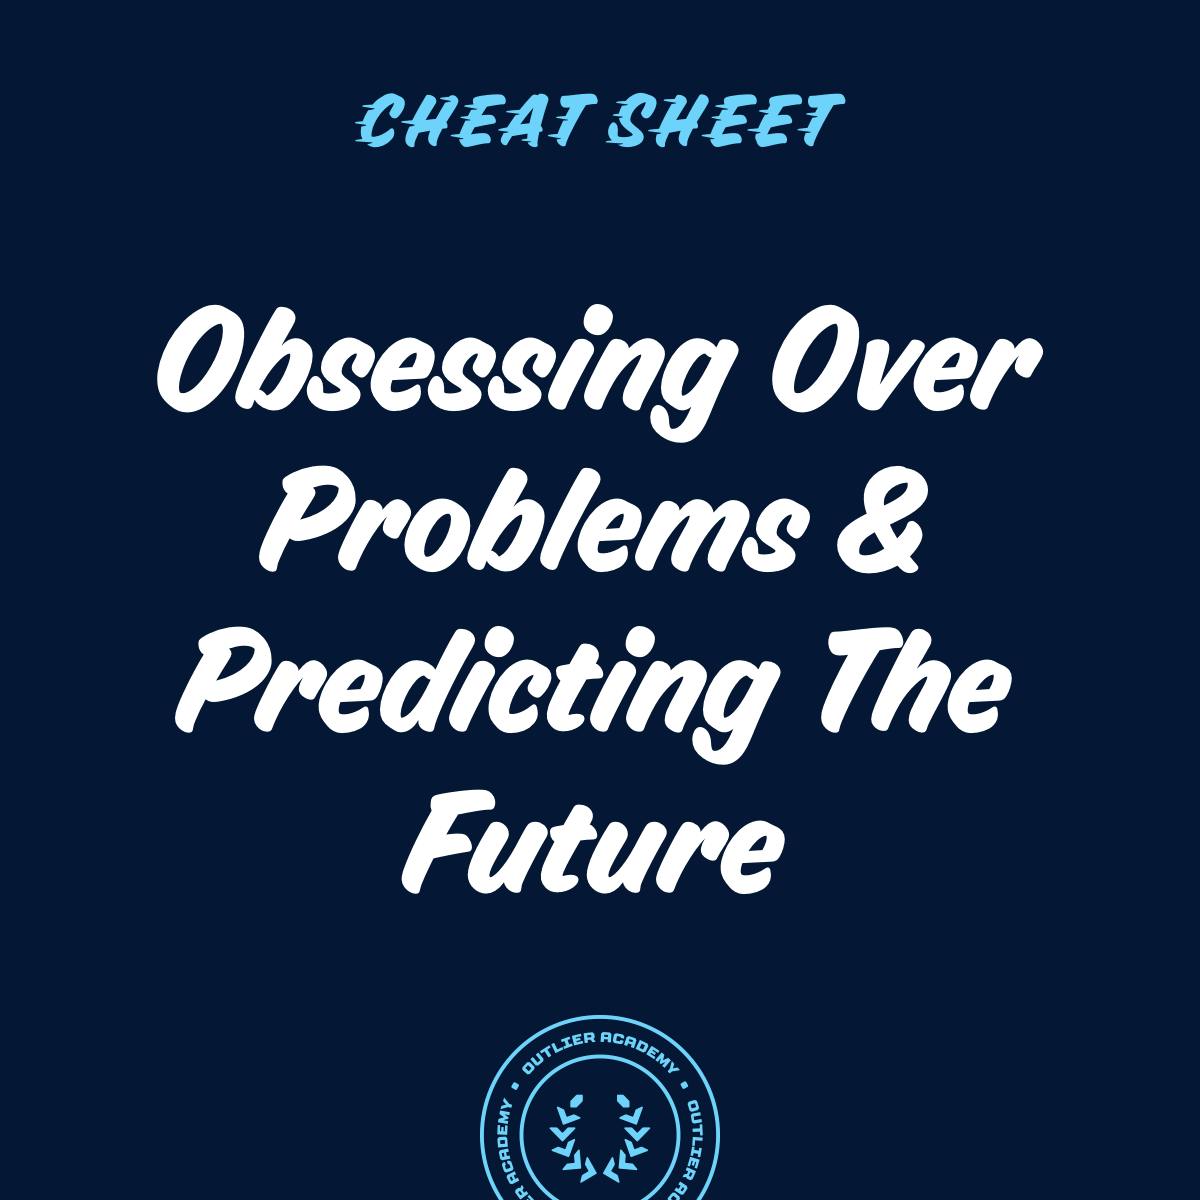 Cheat Sheet: On Obsessing Over Problems, Predicting the Future, and Why Healthcare Should be a Product (Not a Service) Image